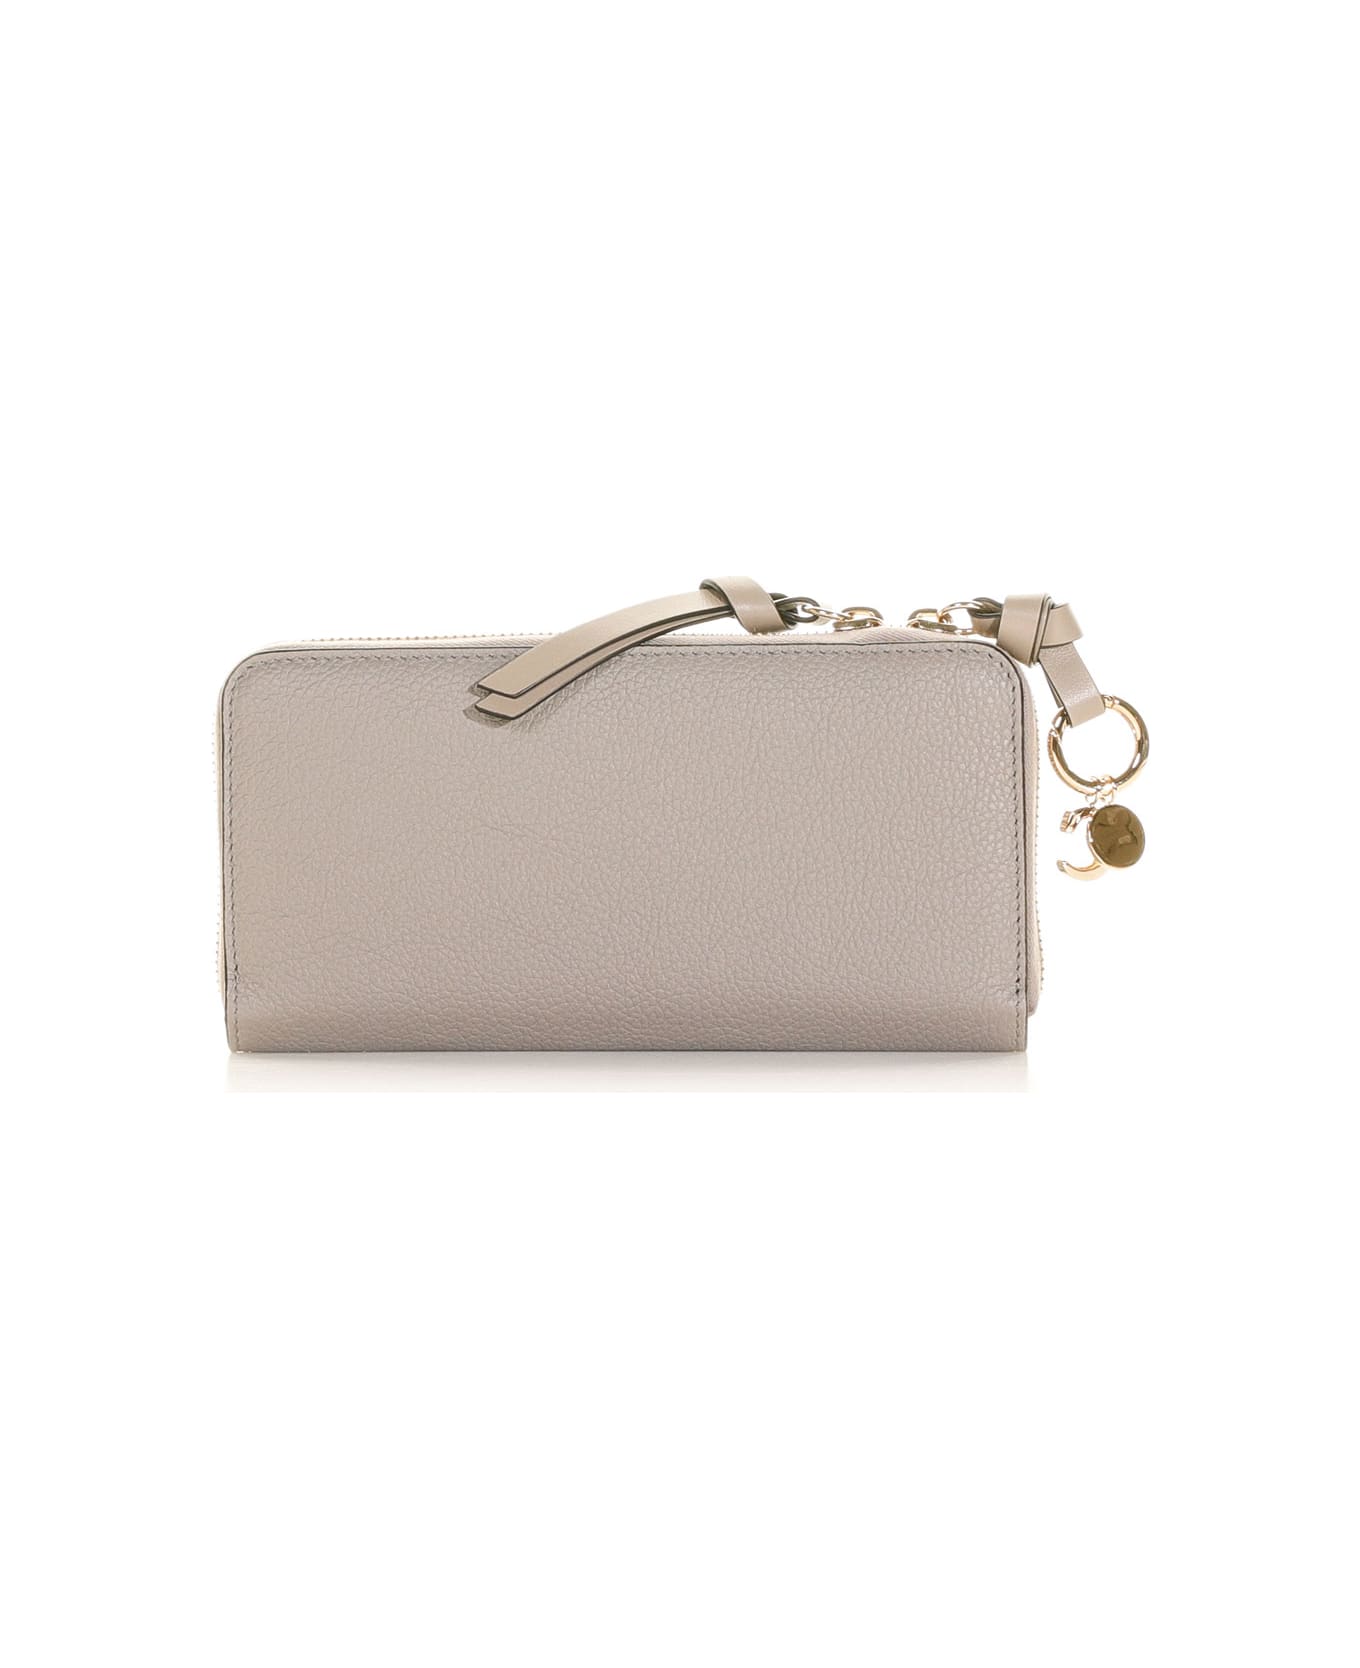 Chloé Full Zip Leather Wallet - CASHMERE GREY